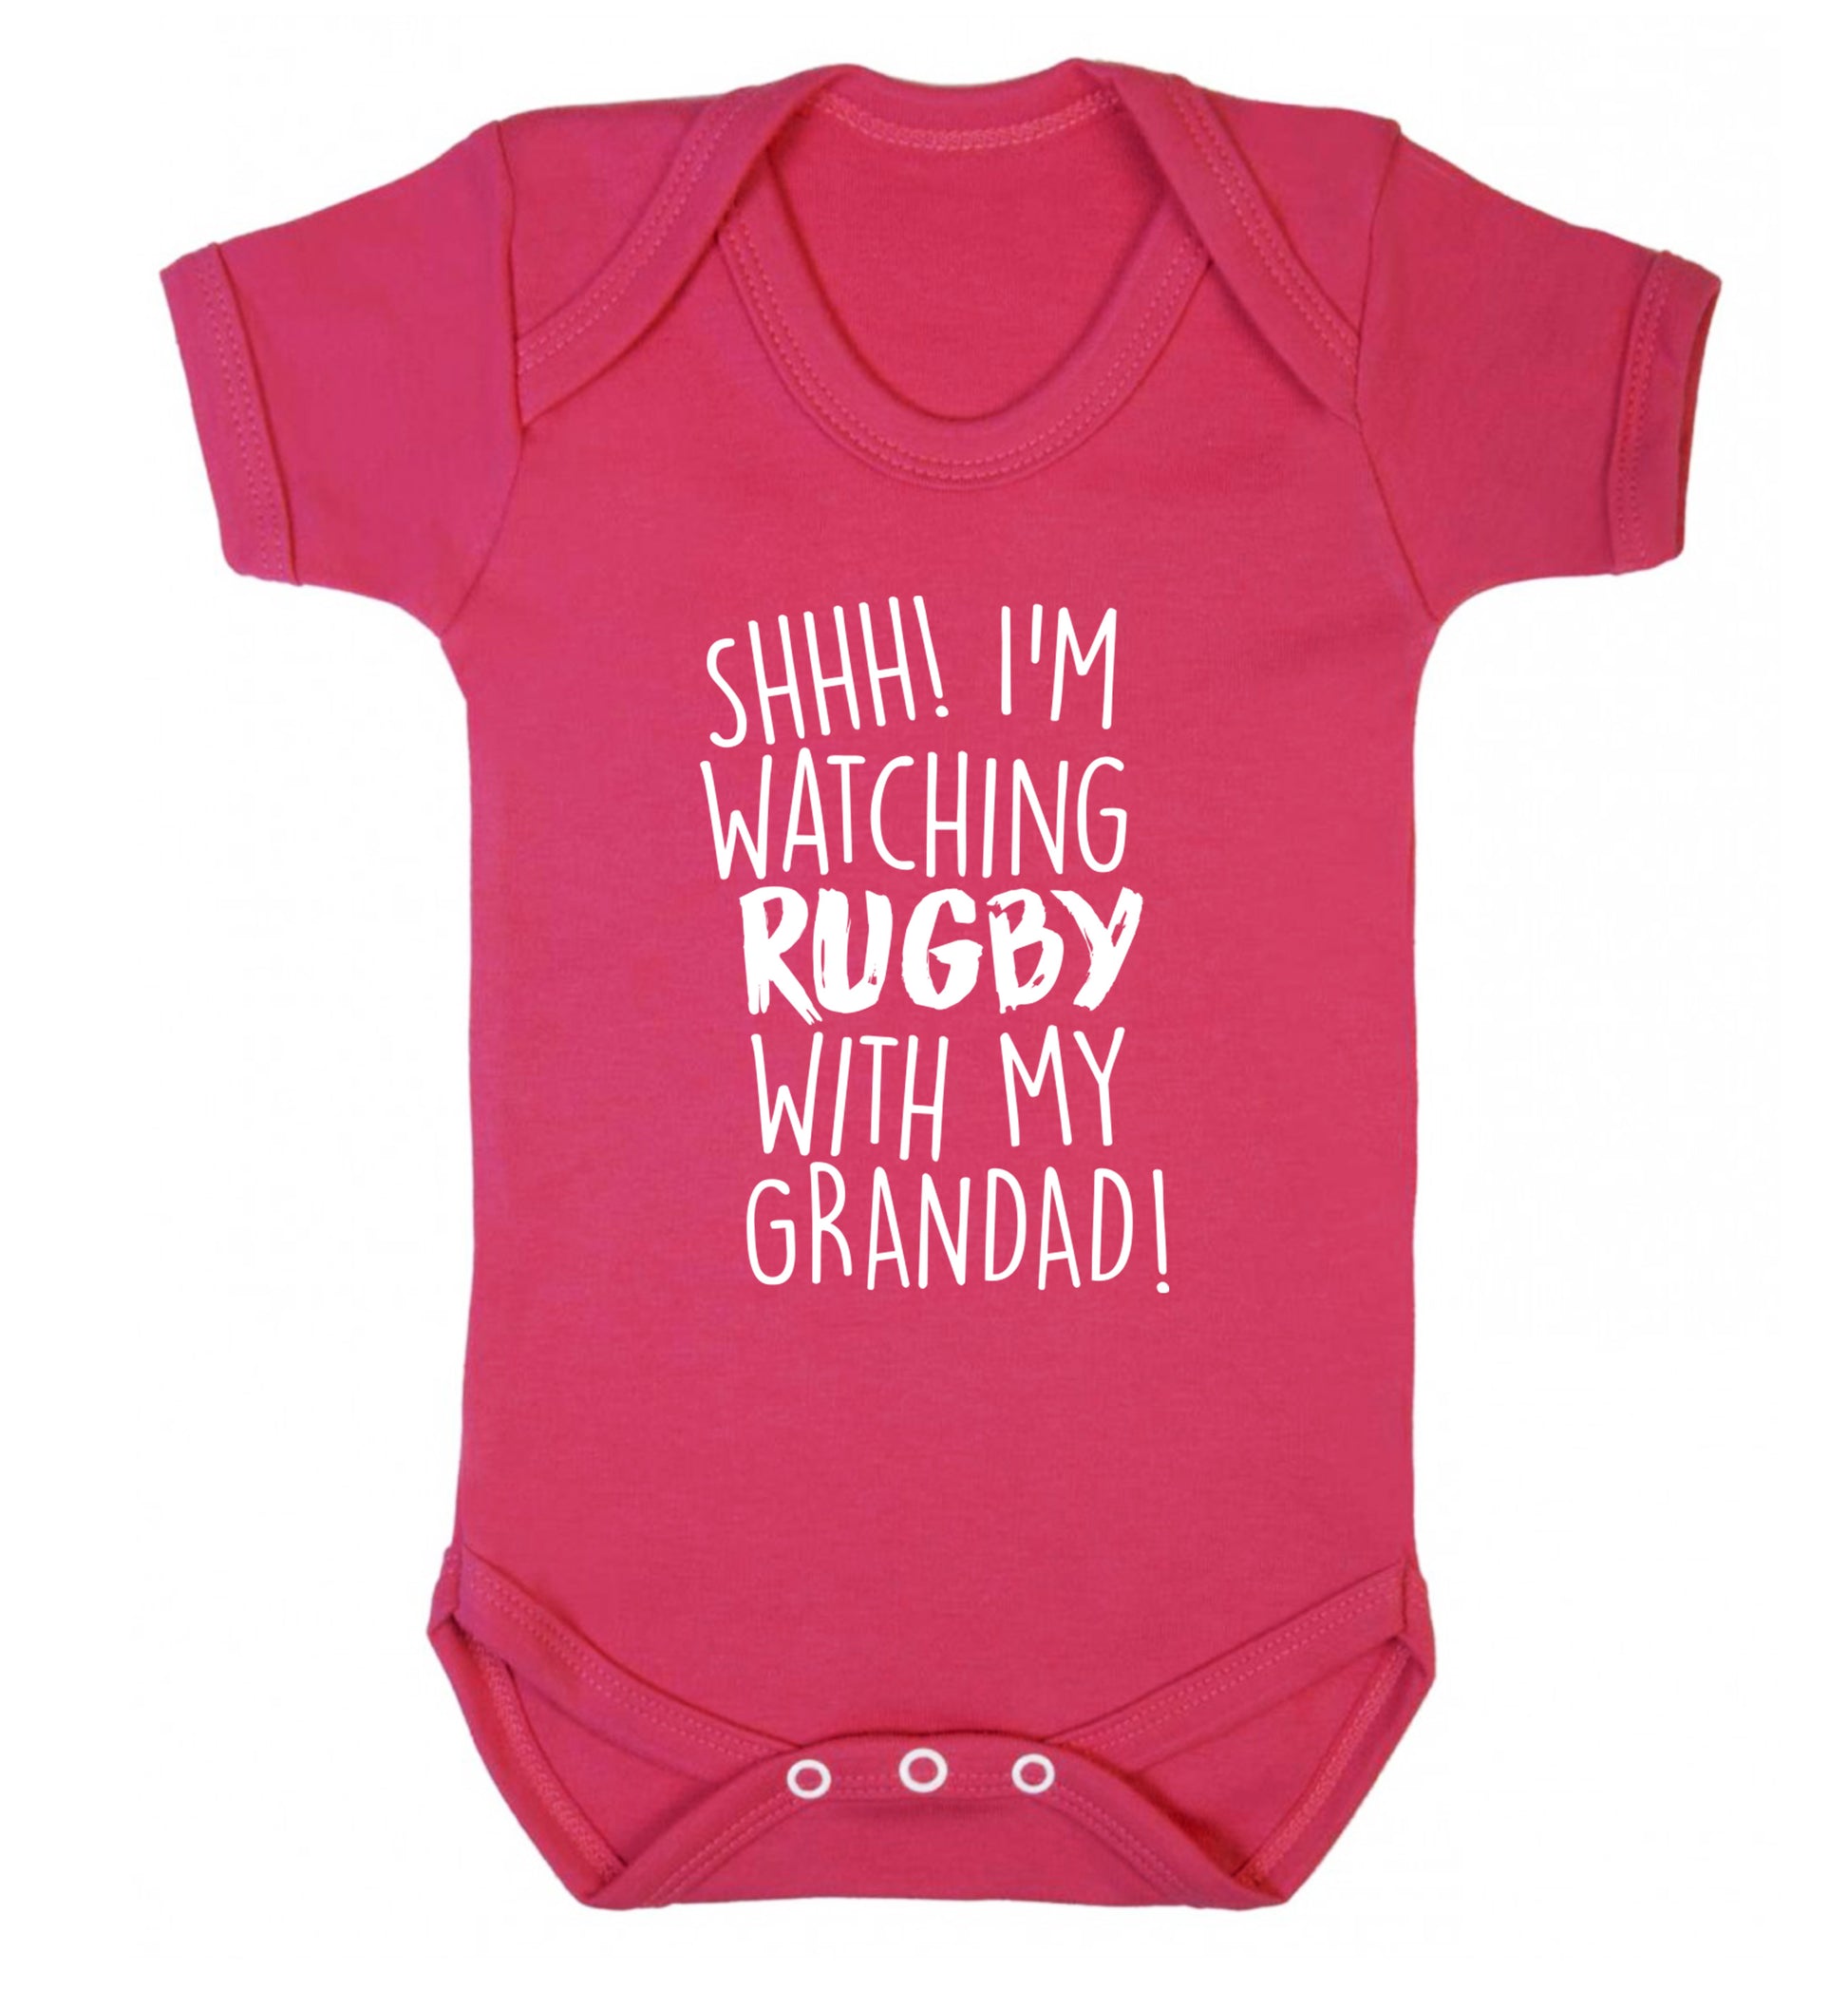 Shh I'm watching rugby with my grandaughter Baby Vest dark pink 18-24 months